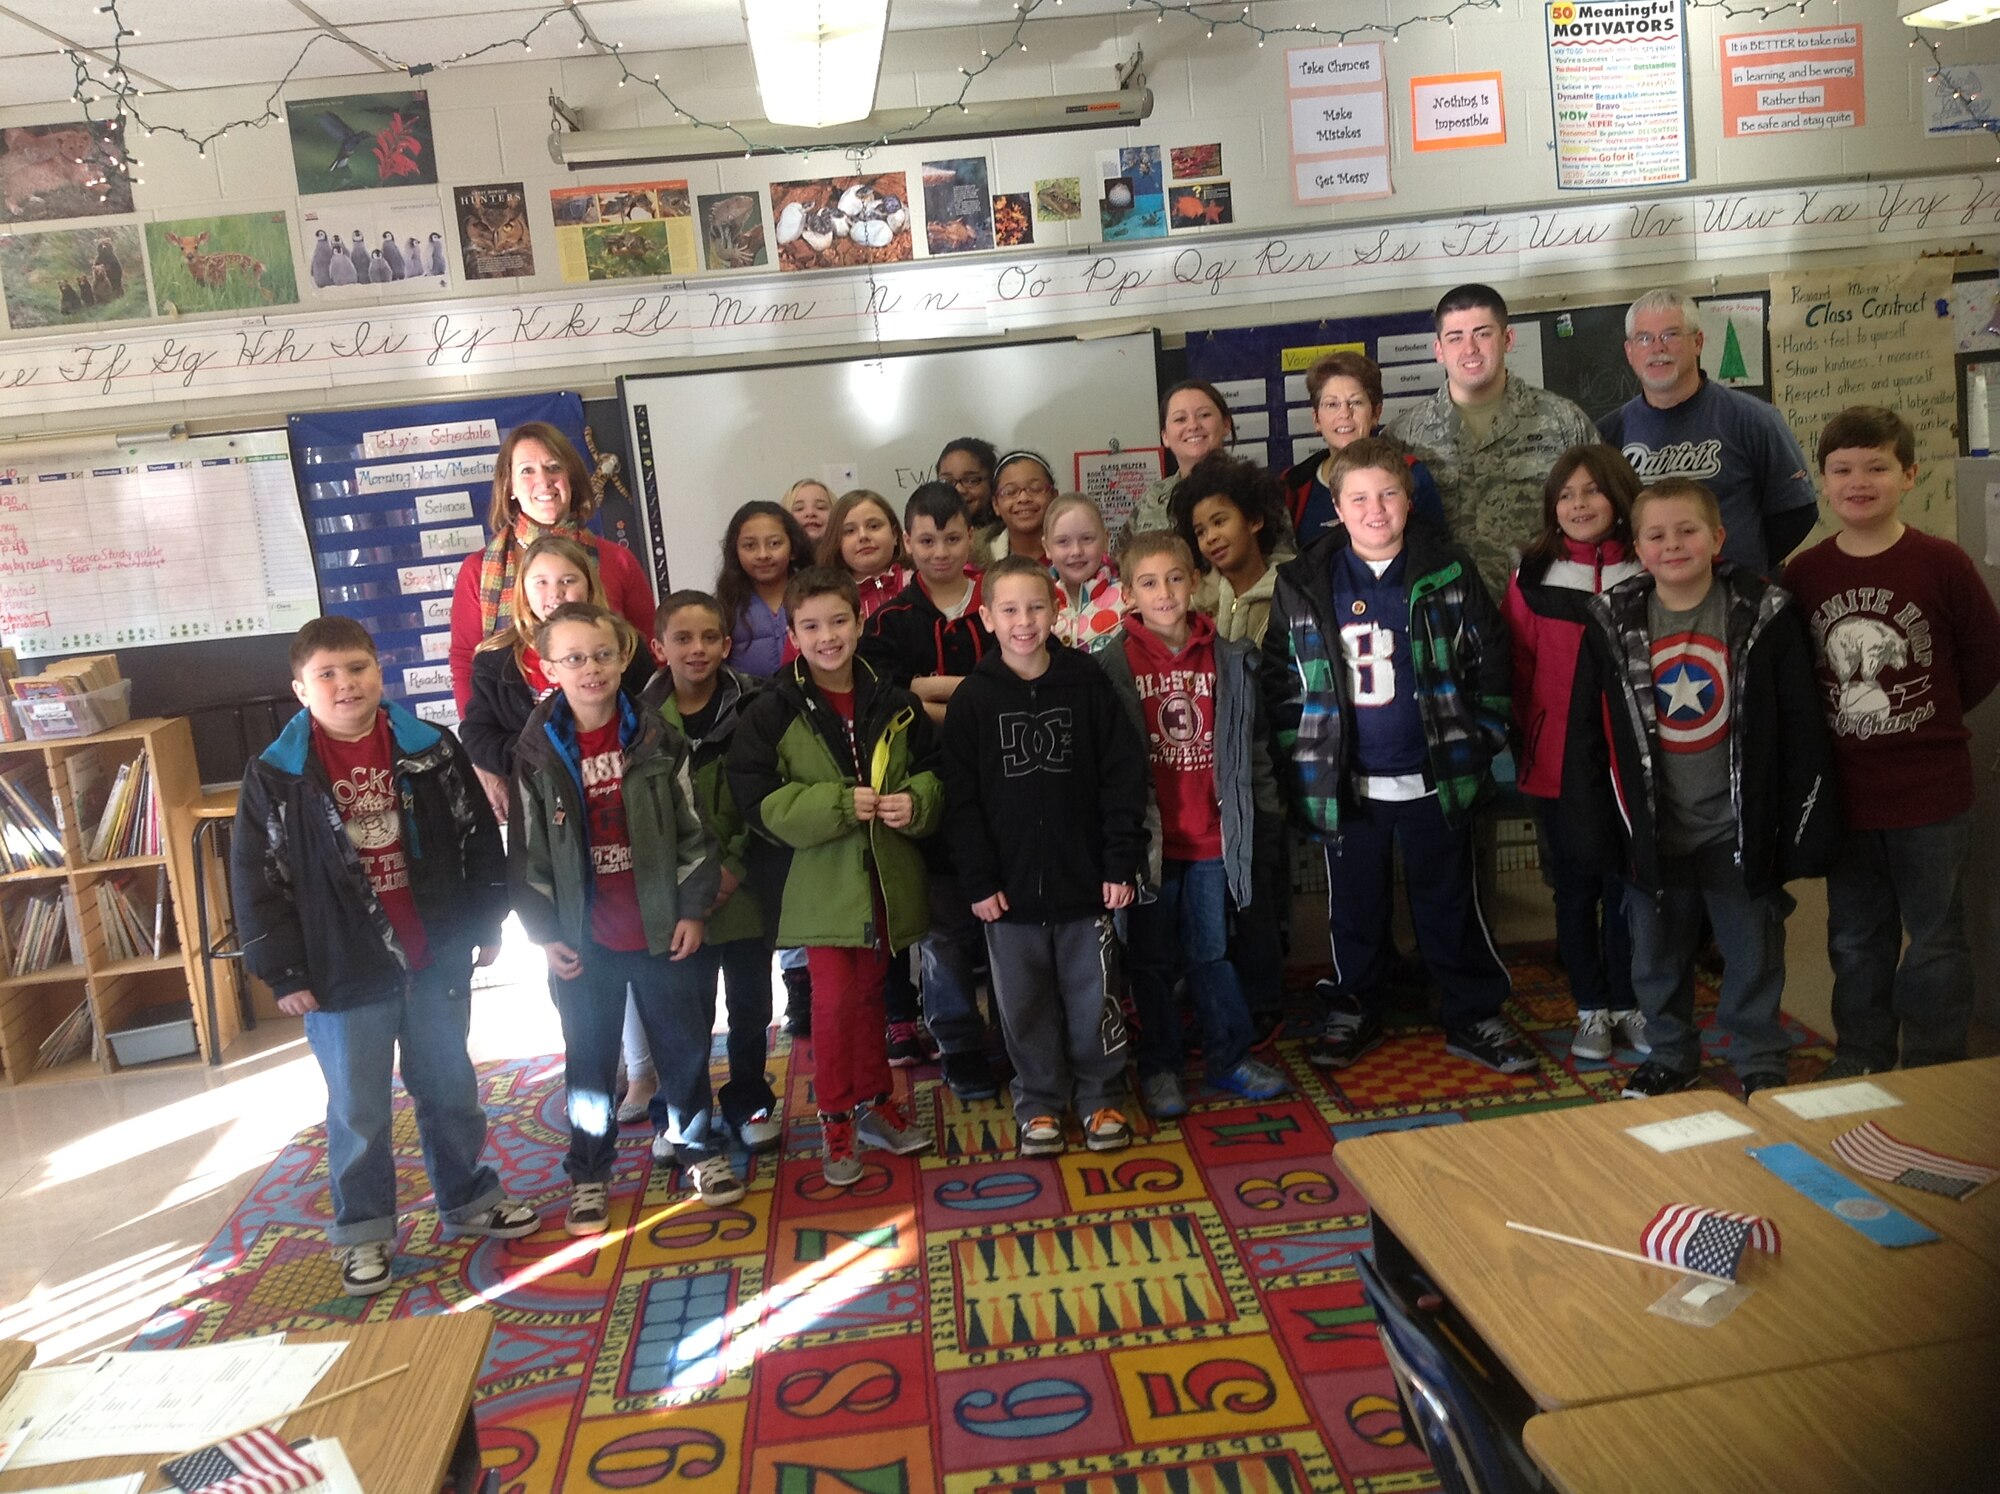 Staff Sgt. Jessica Roy and Senior Airman Kyle Roy visit with Mrs. Cerrato's class at Edgar H. Parkman School in Enfield, Conn. Dec. 11, 2012, before the start of a Wreaths Across America Ceremony hosted there to honor veterans. (Photo courtesy of Staff Sgt. Jessica Roy)